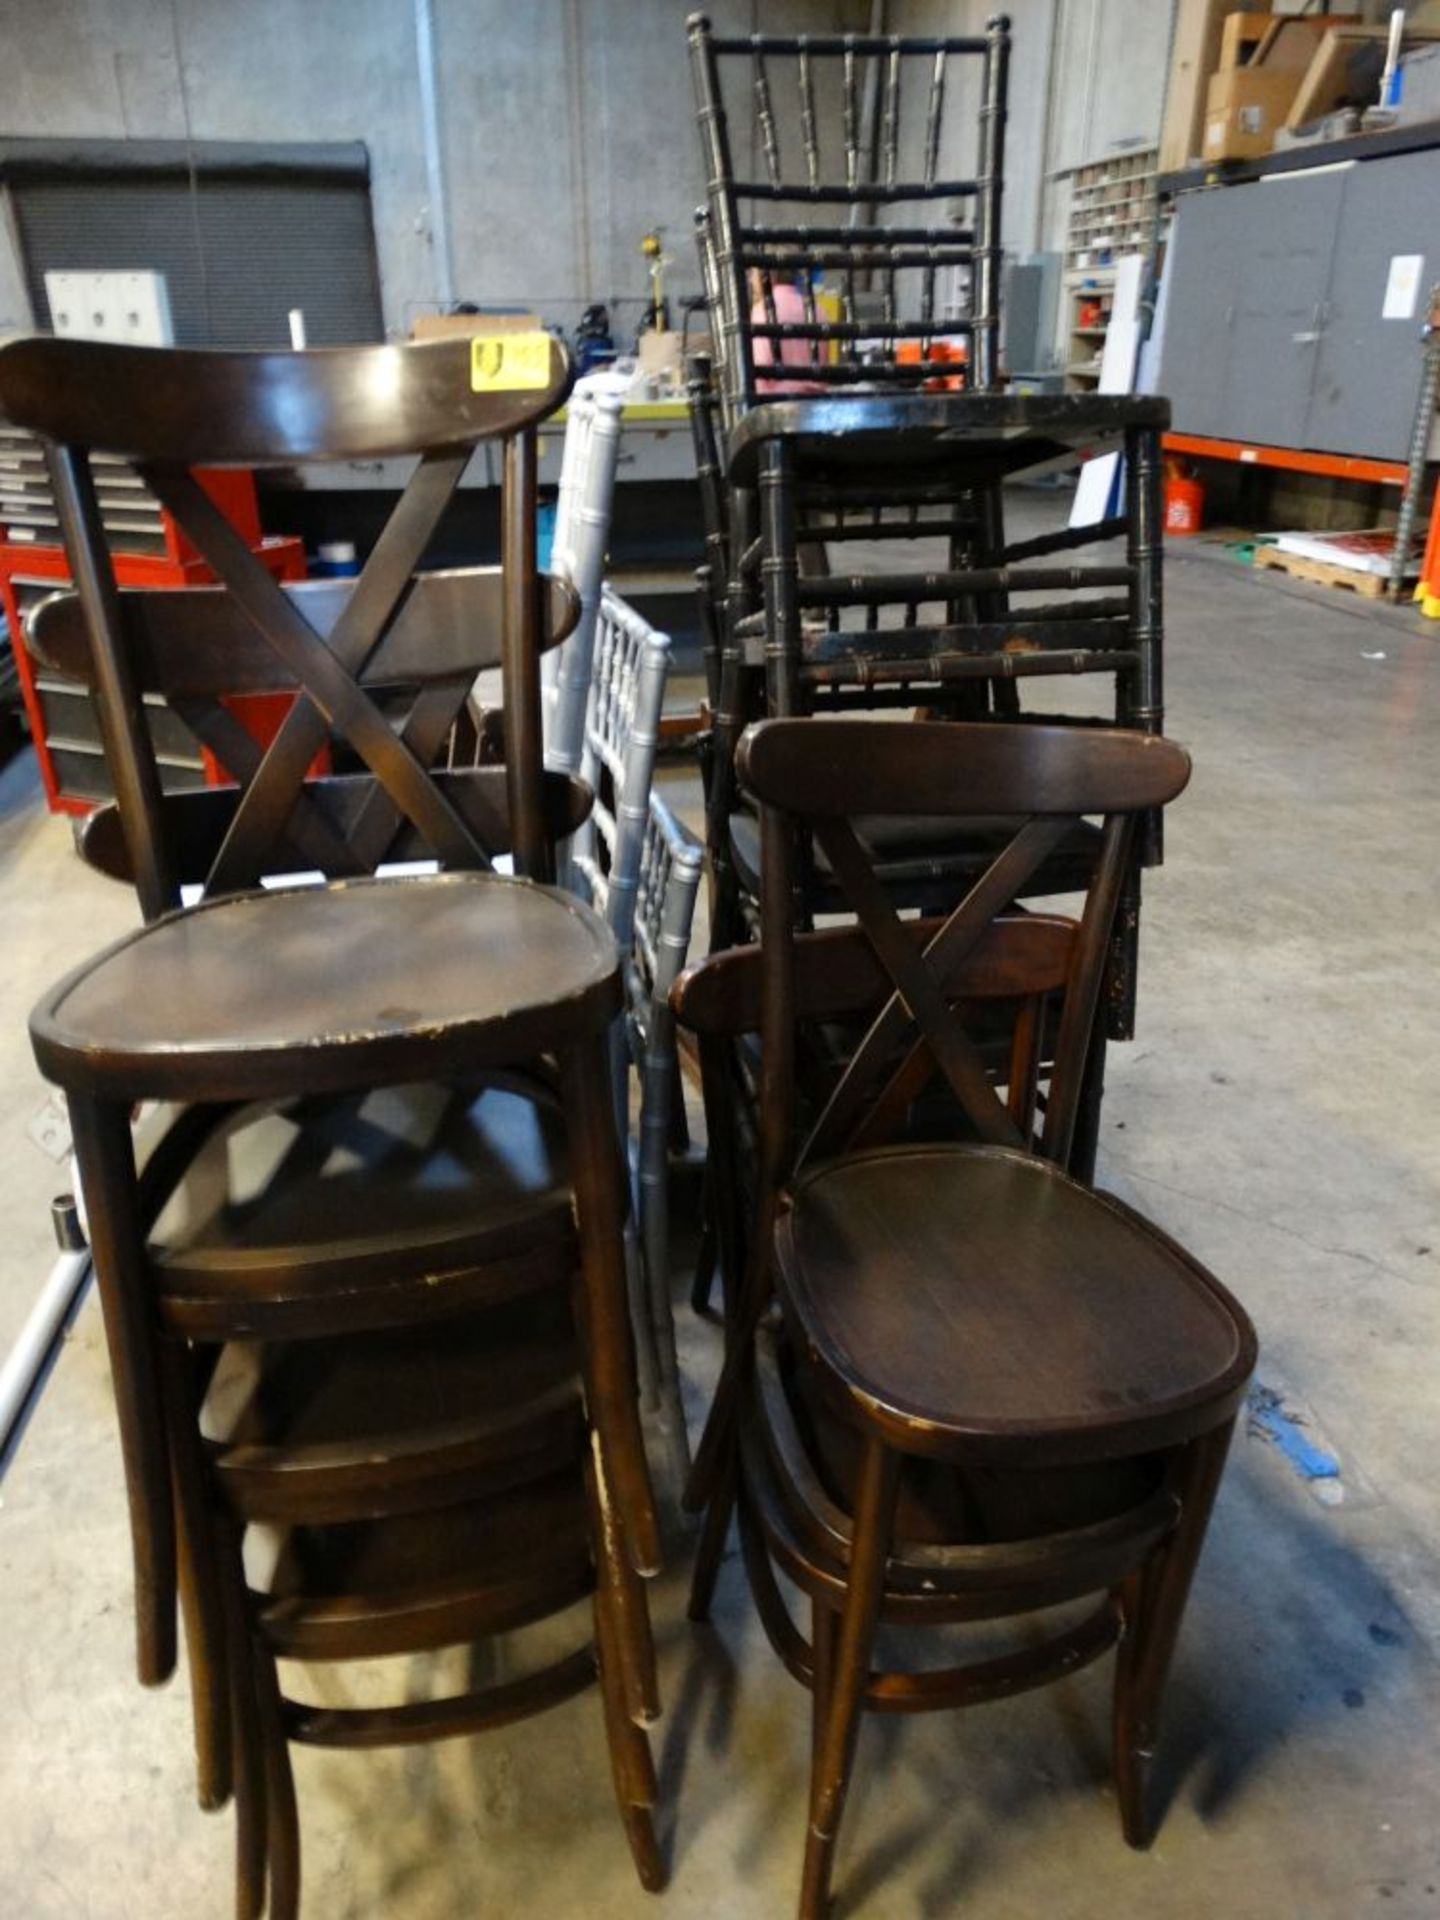 Lot of Chairs- Need Repair